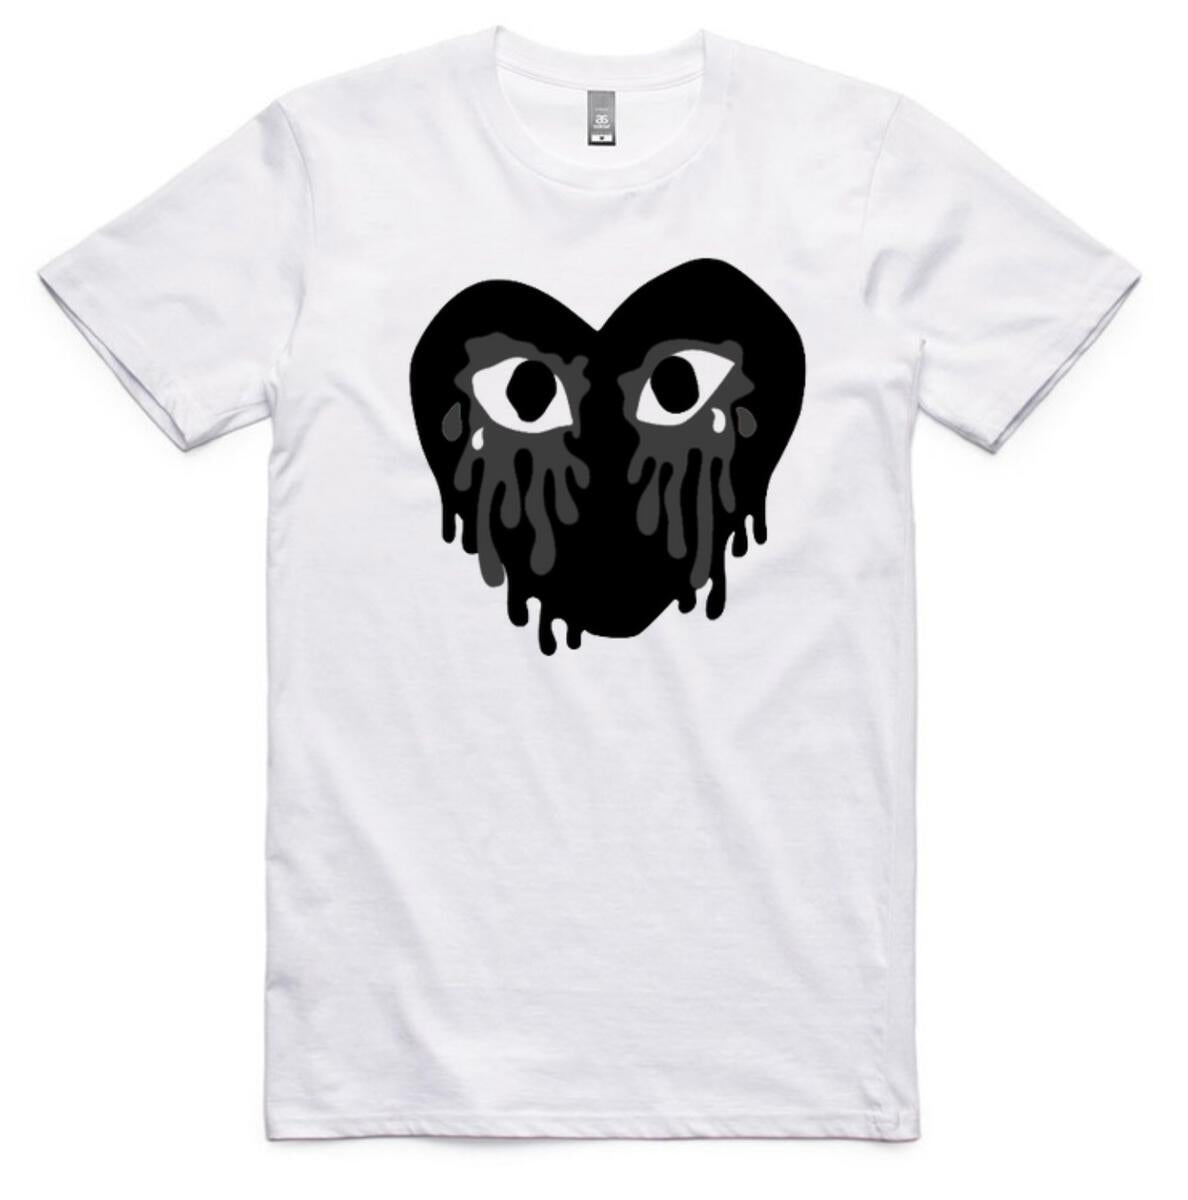 Crying Heart T-Shirt - Wht/Blk